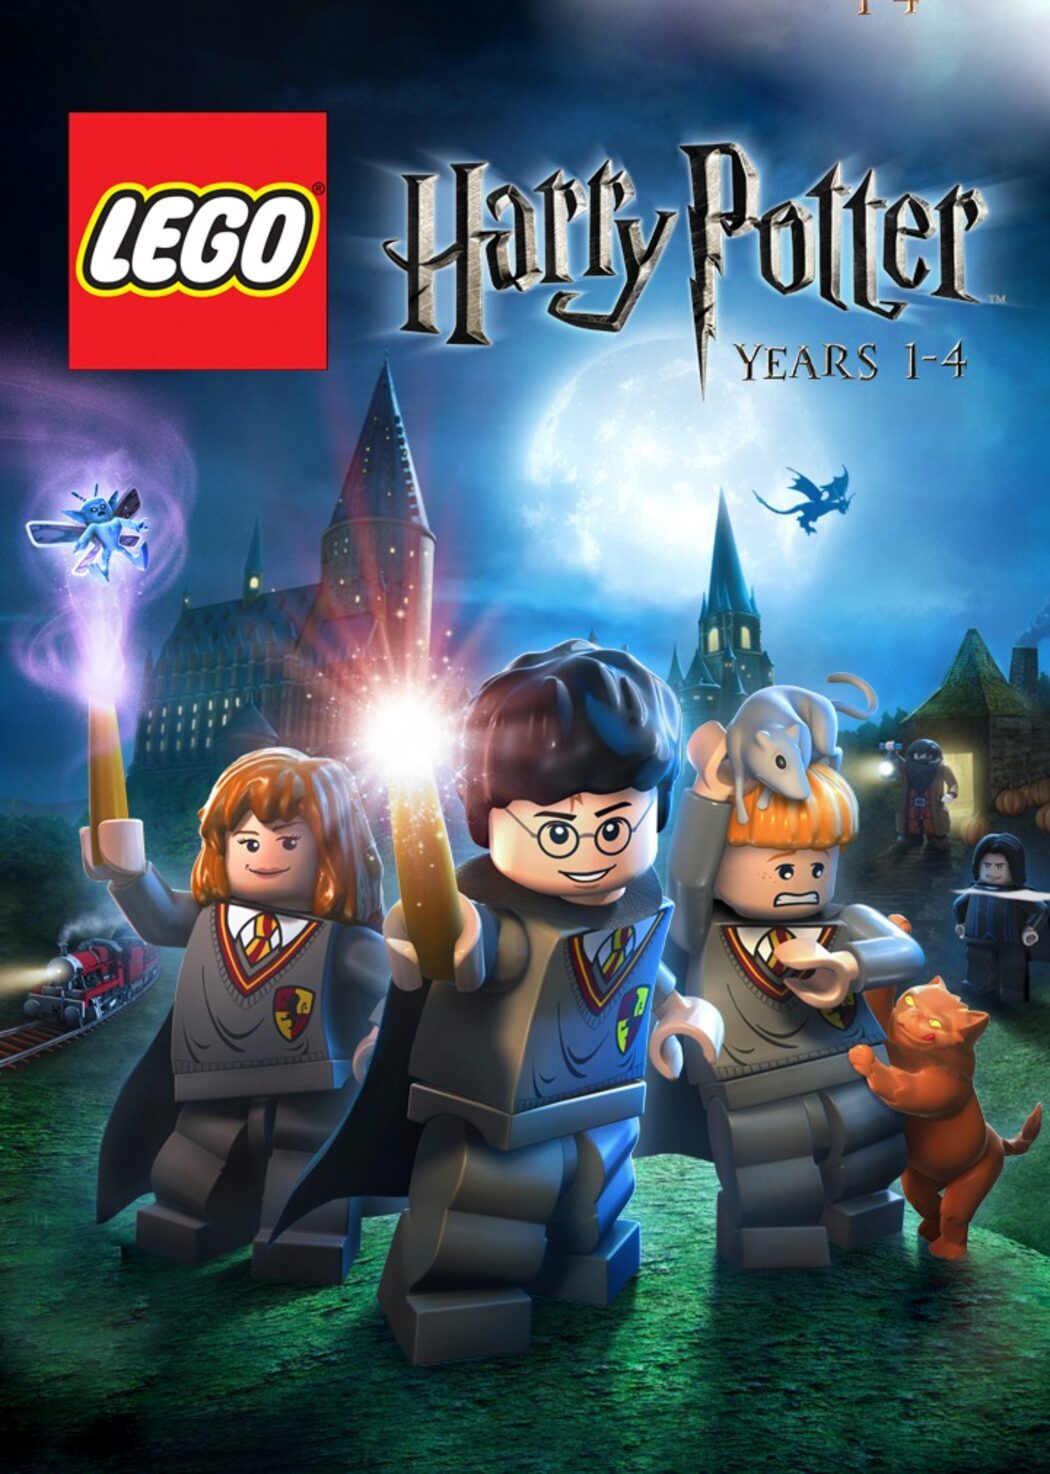 Buy cheap LEGO Harry Potter: Years 1-4 cd key - lowest price